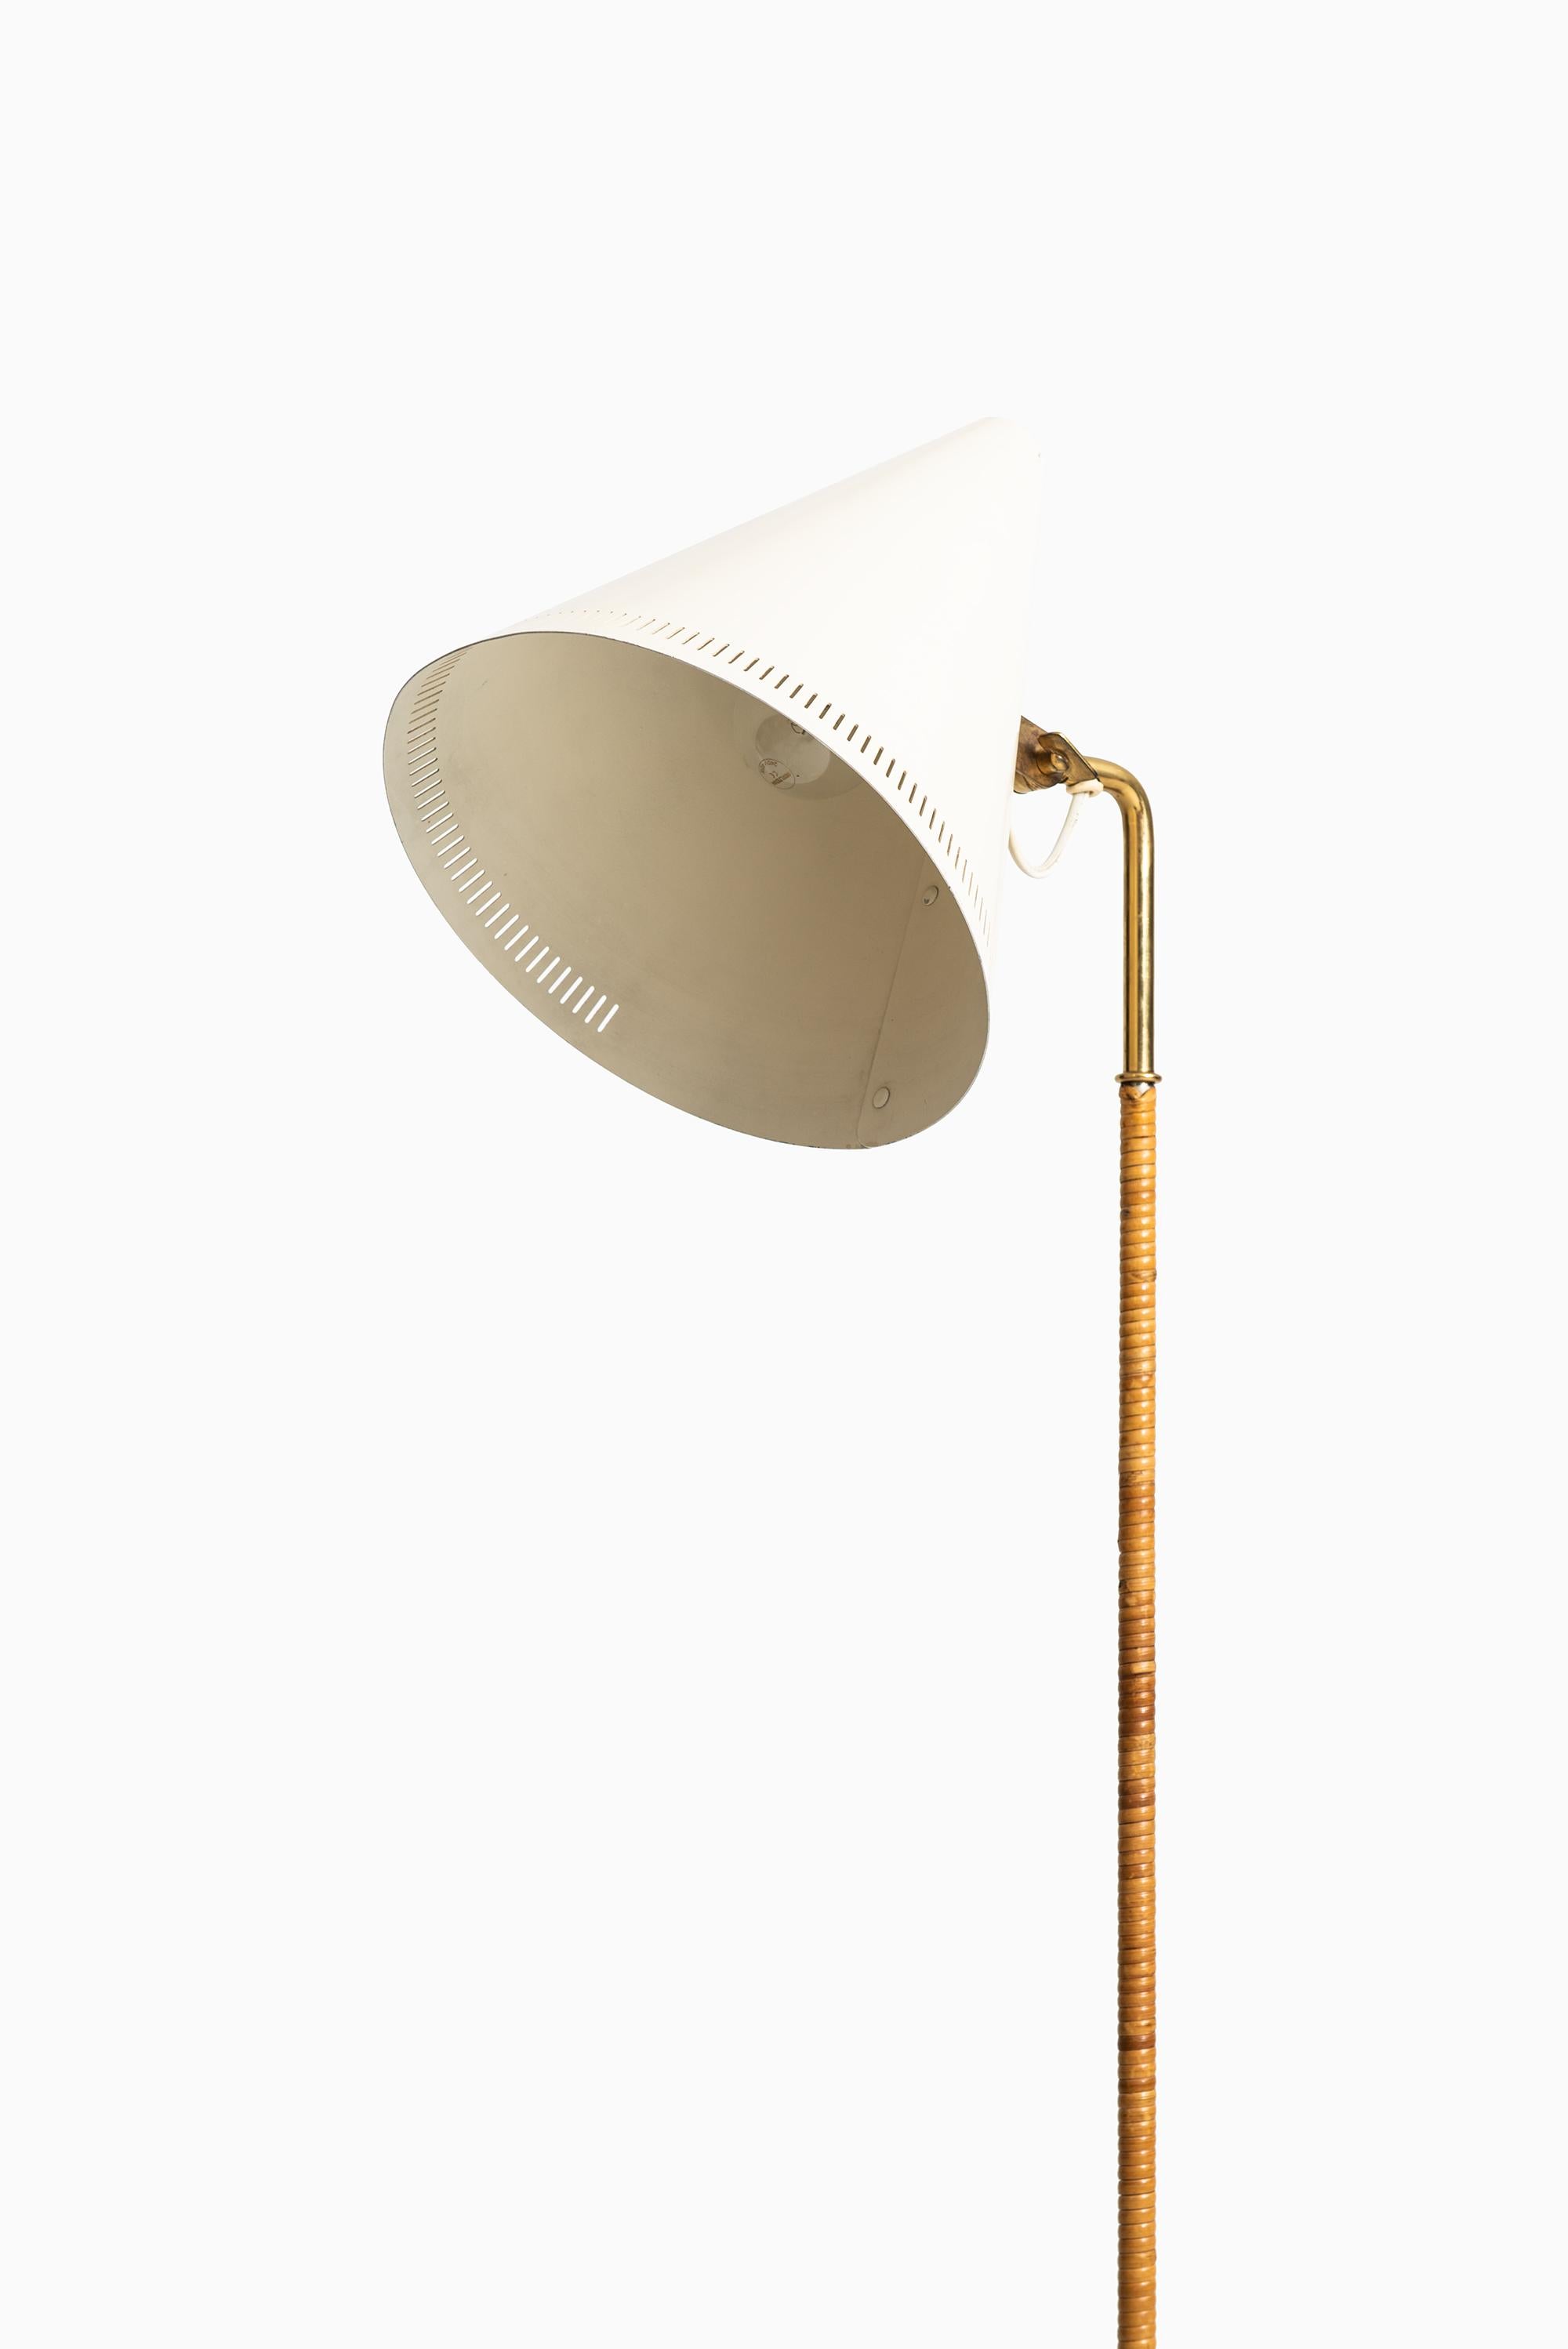 Scandinavian Modern Paavo Tynell Early Floor Lamp Model K-10-10 by Taito Oy in Finland